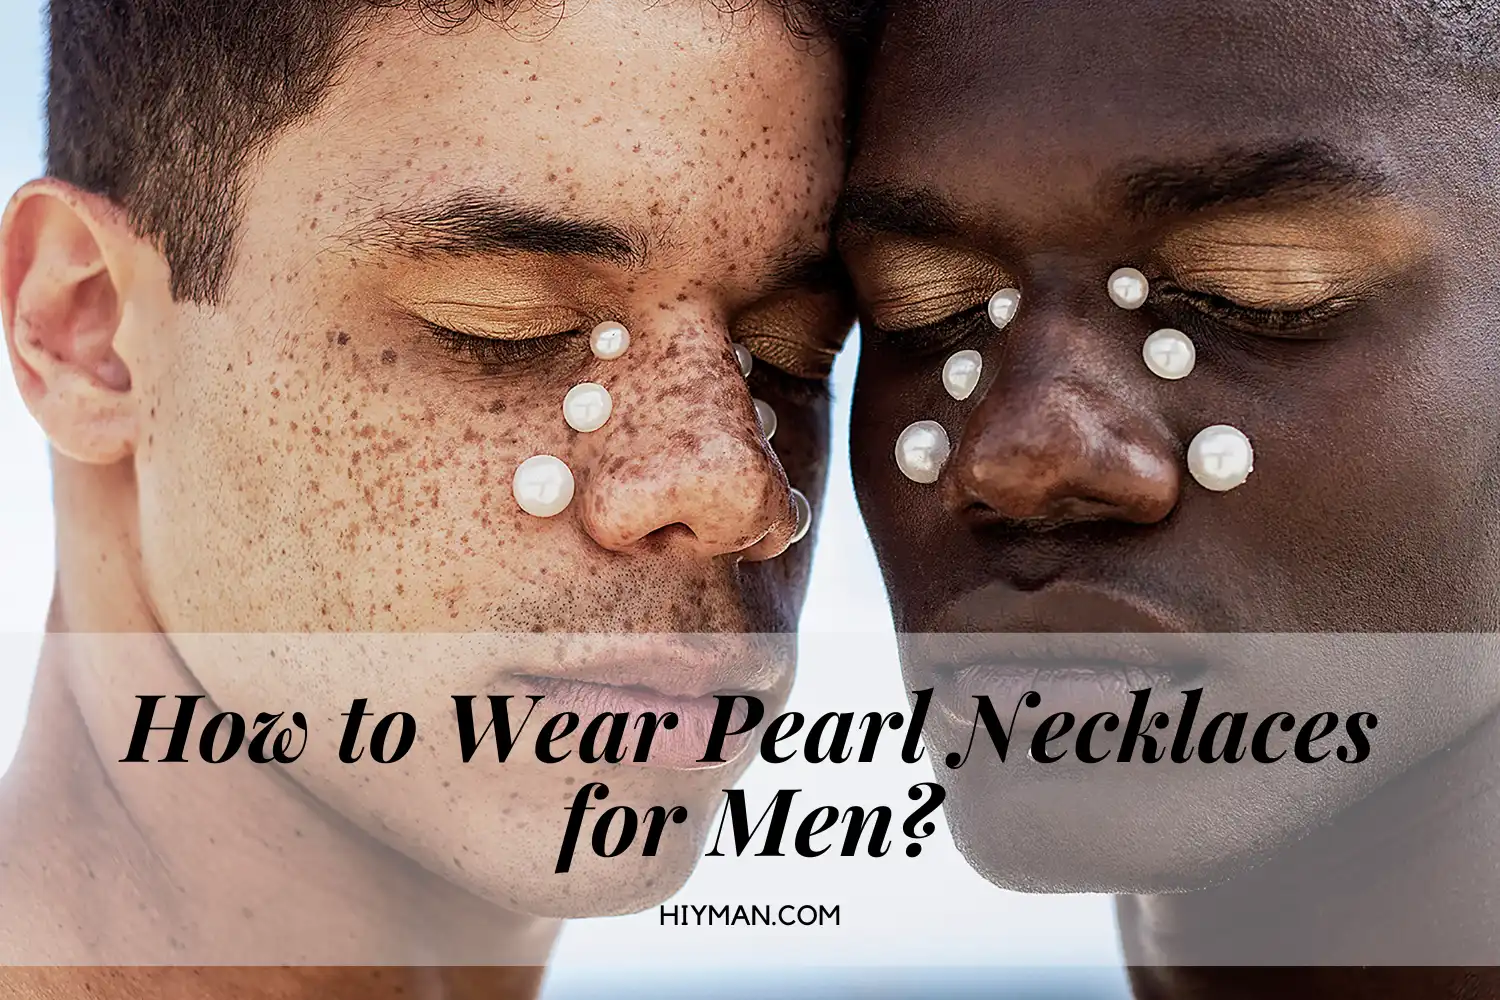 How to Wear Pearl Necklaces for Men?